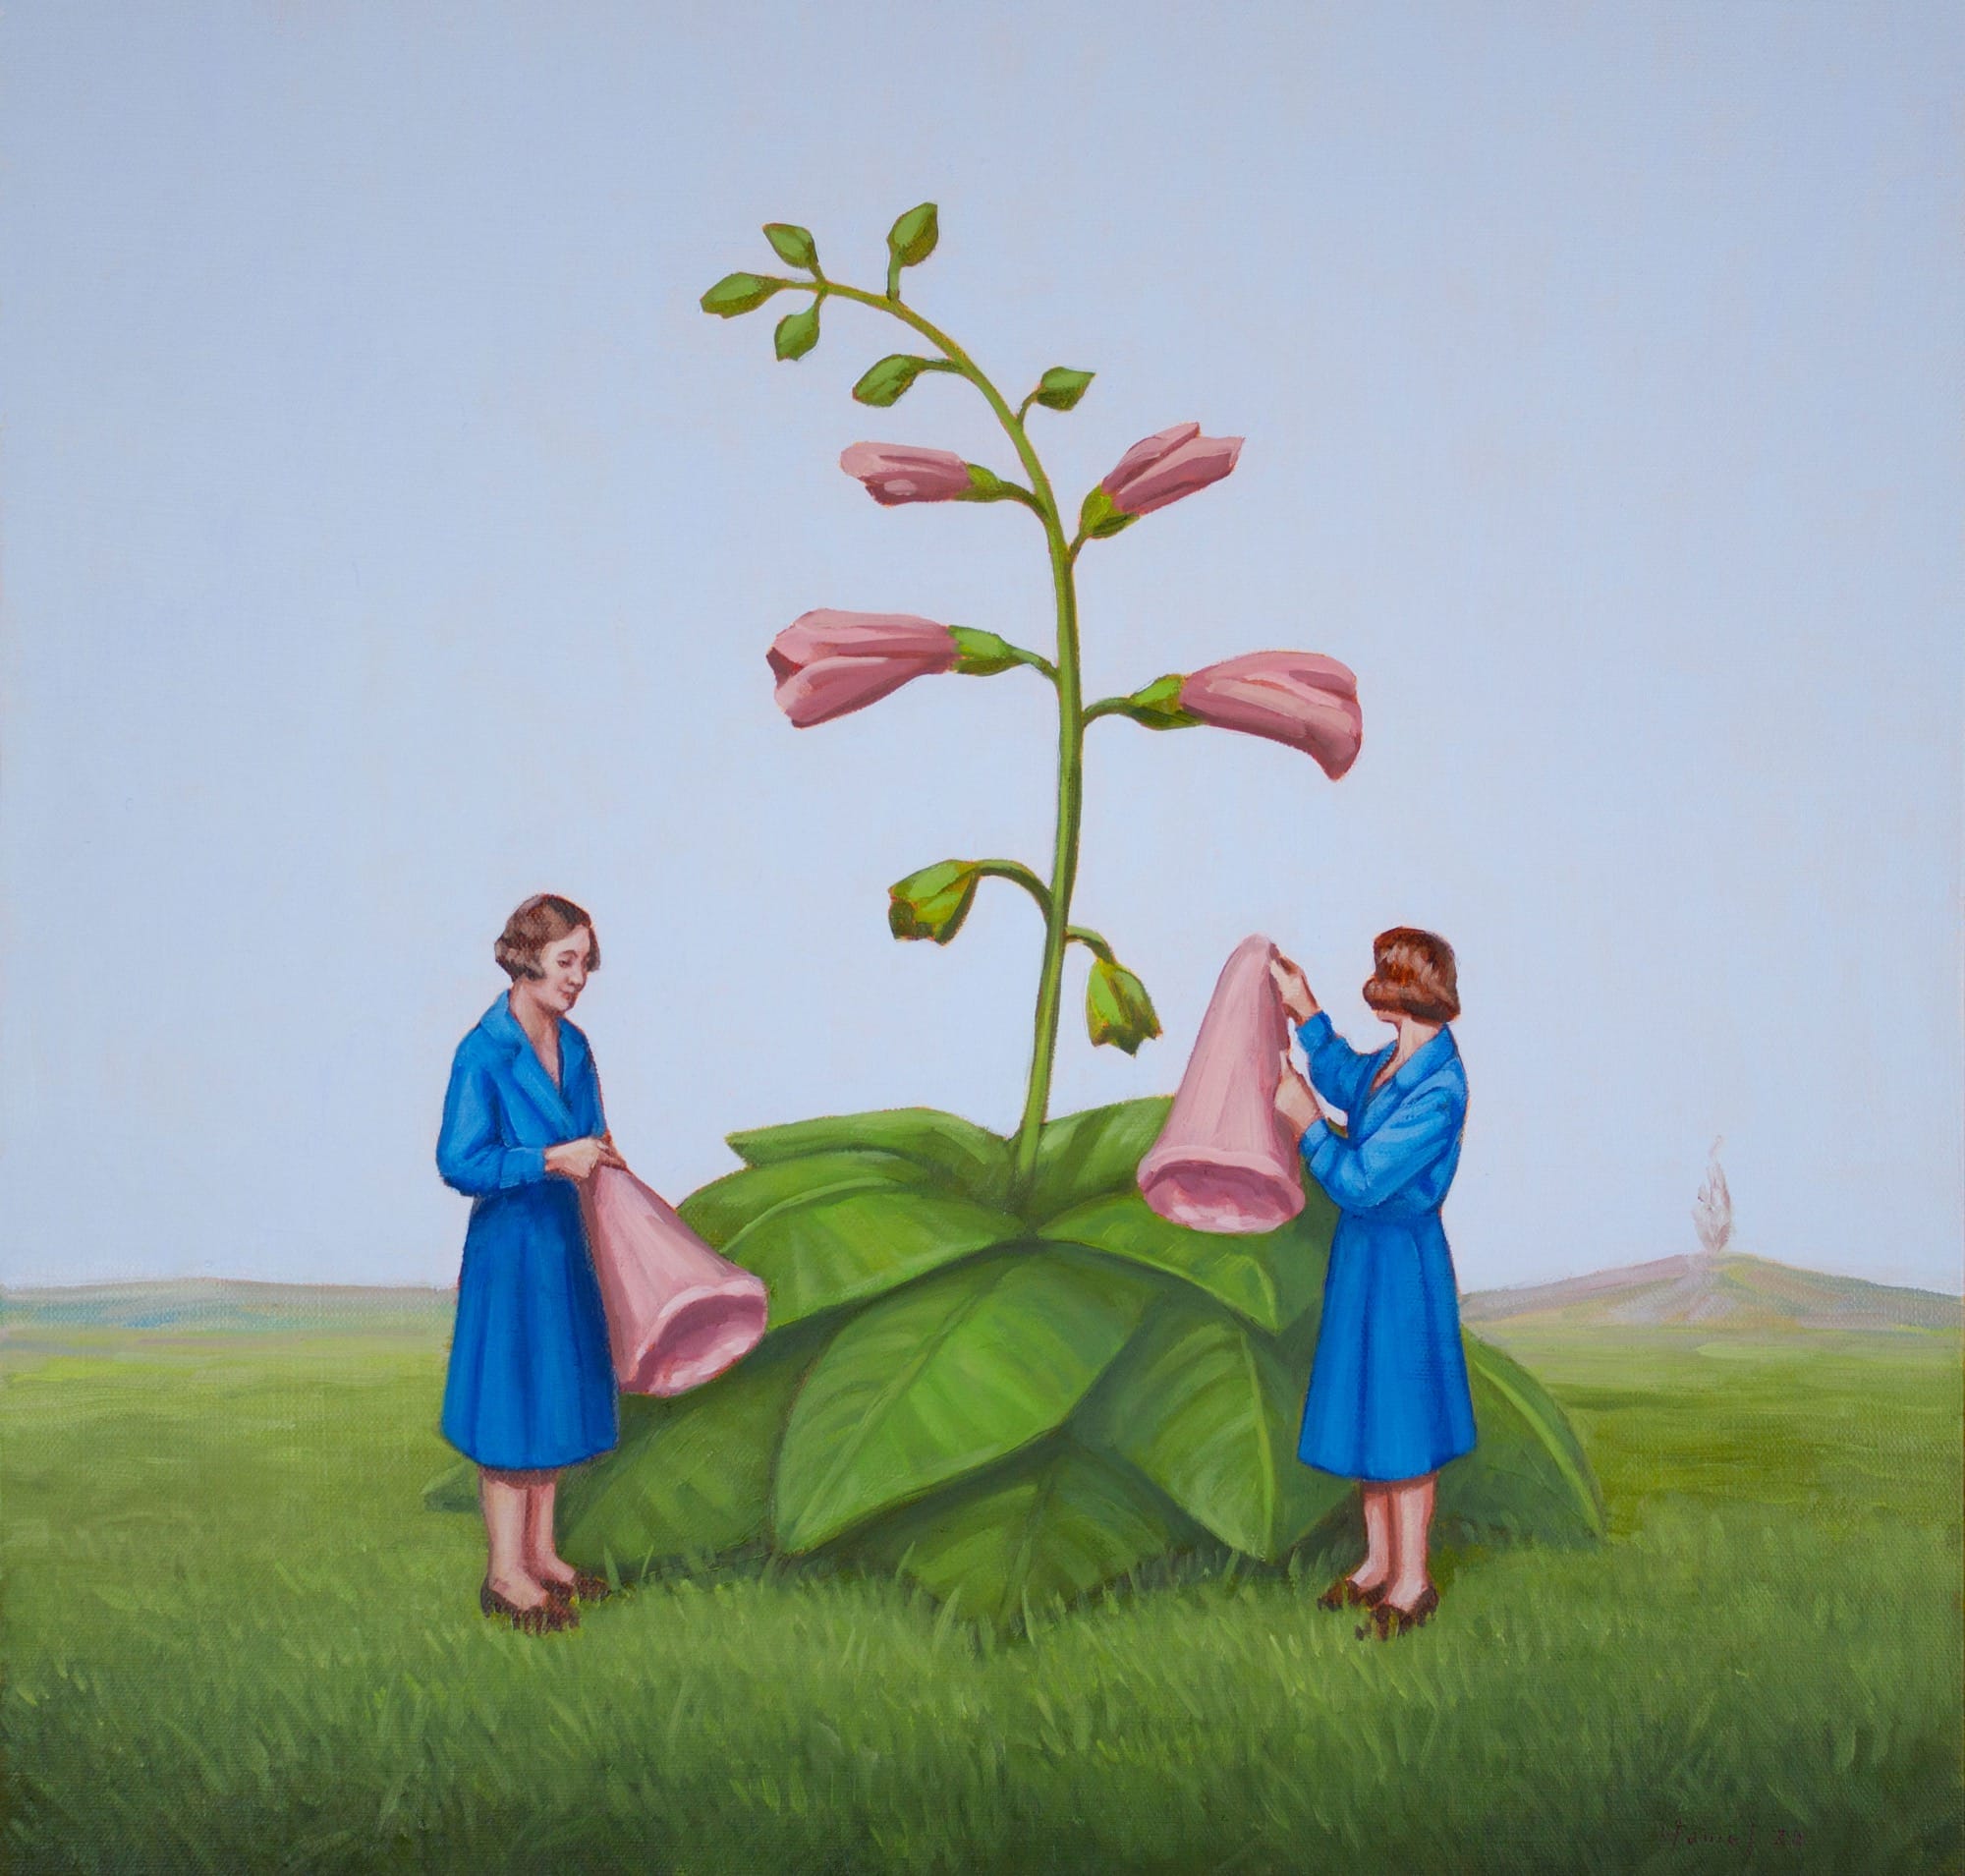 two women in blue dresses attach pink flowers to a large plant